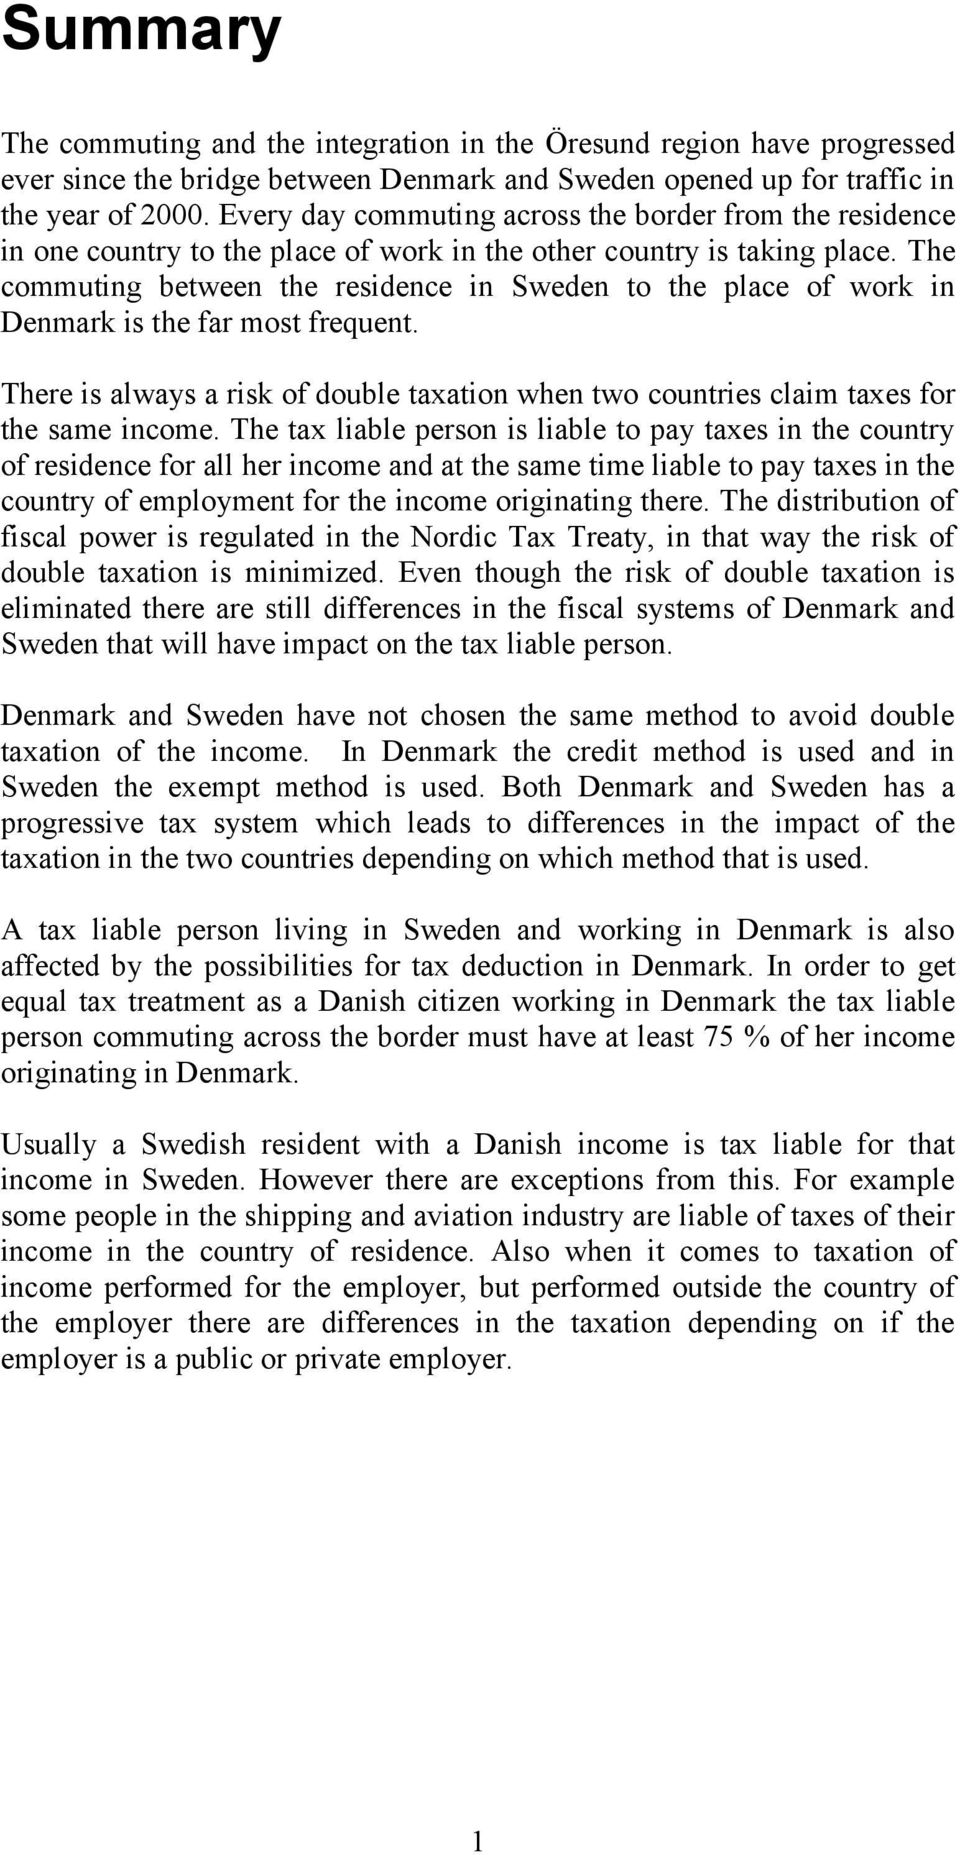 The commuting between the residence in Sweden to the place of work in Denmark is the far most frequent. There is always a risk of double taxation when two countries claim taxes for the same income.